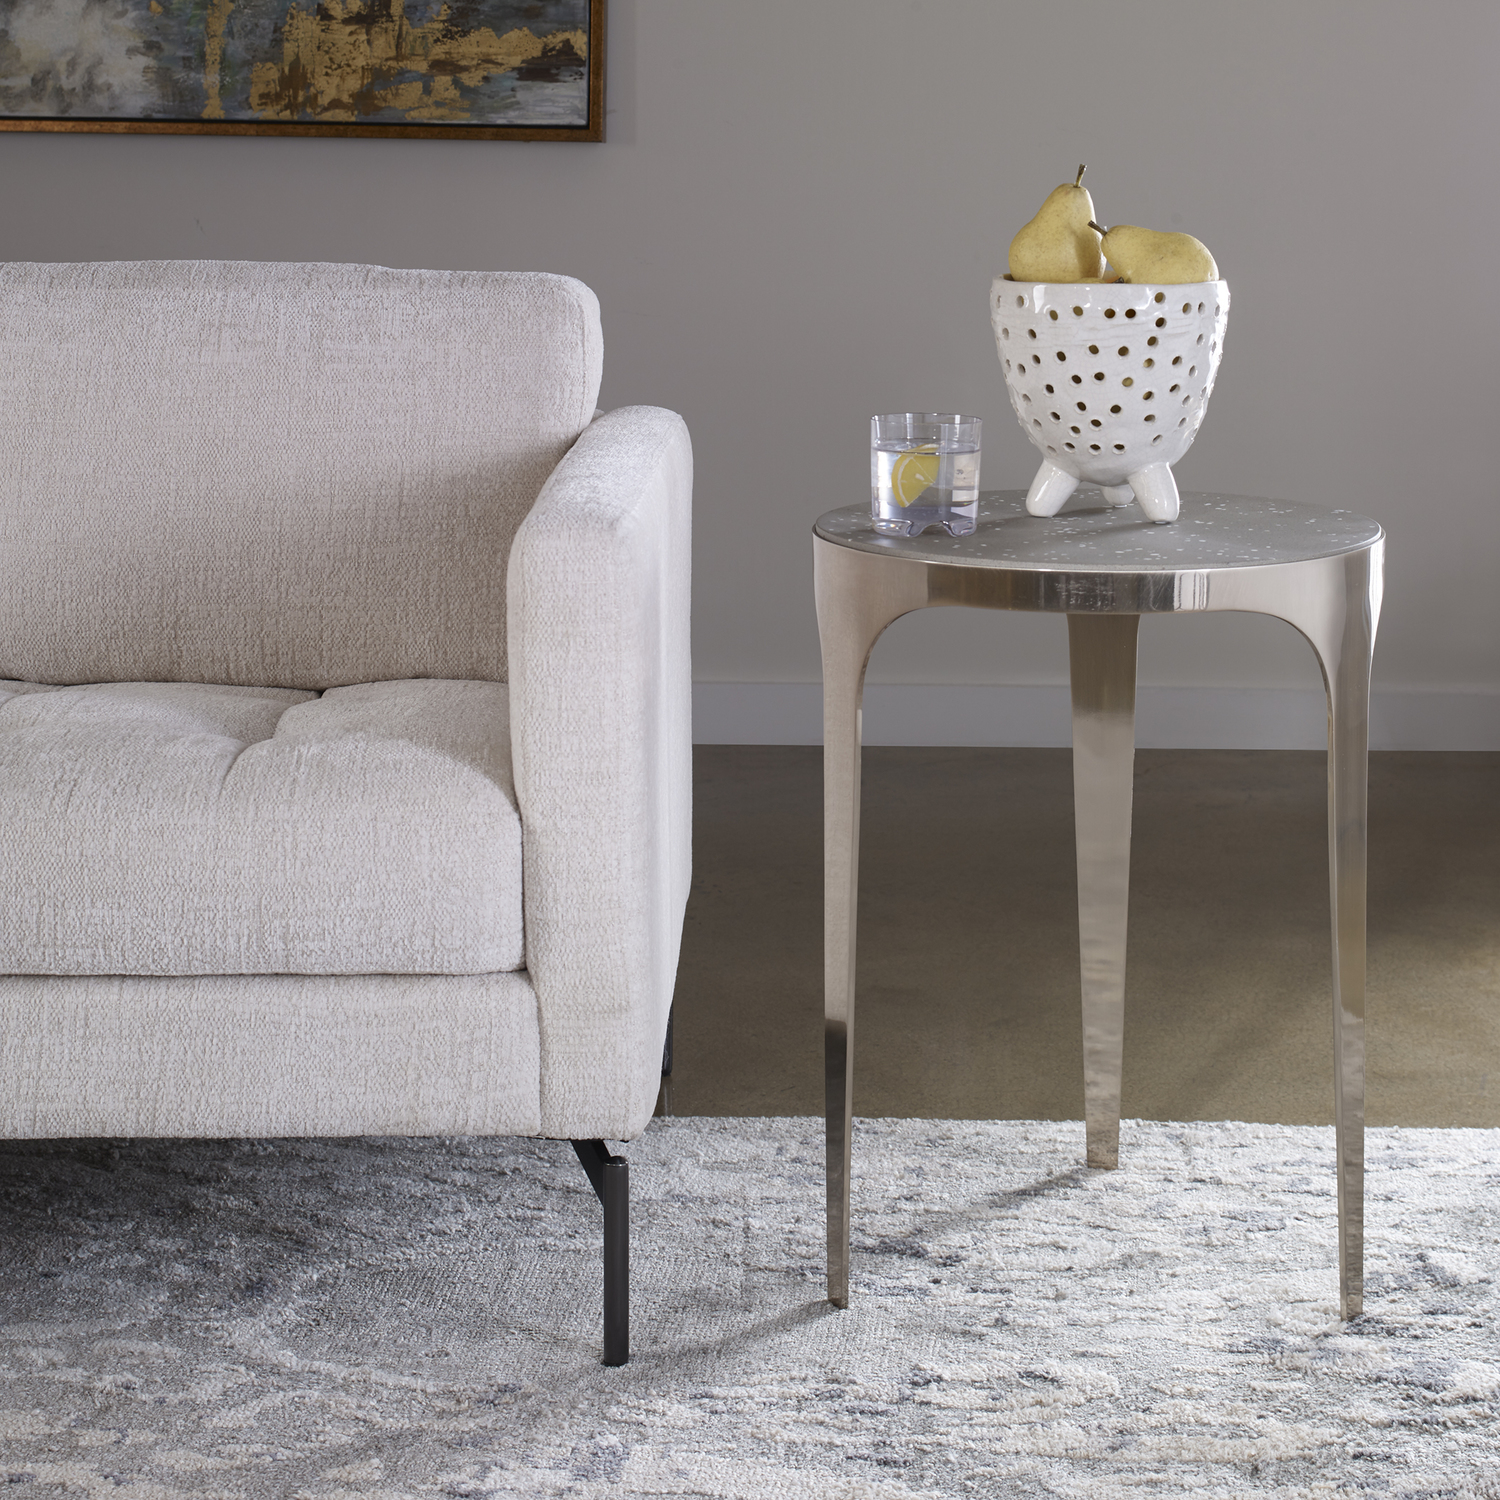 rectangular side table Uttermost Accent & End Tables This Modern Side Table Features A Circular Top Made From Light Gray Concrete With White Fleck Details, Creating A Terrazzo Look. The Sleek Metal Base Is Finished In Plated Brushed Nickel.